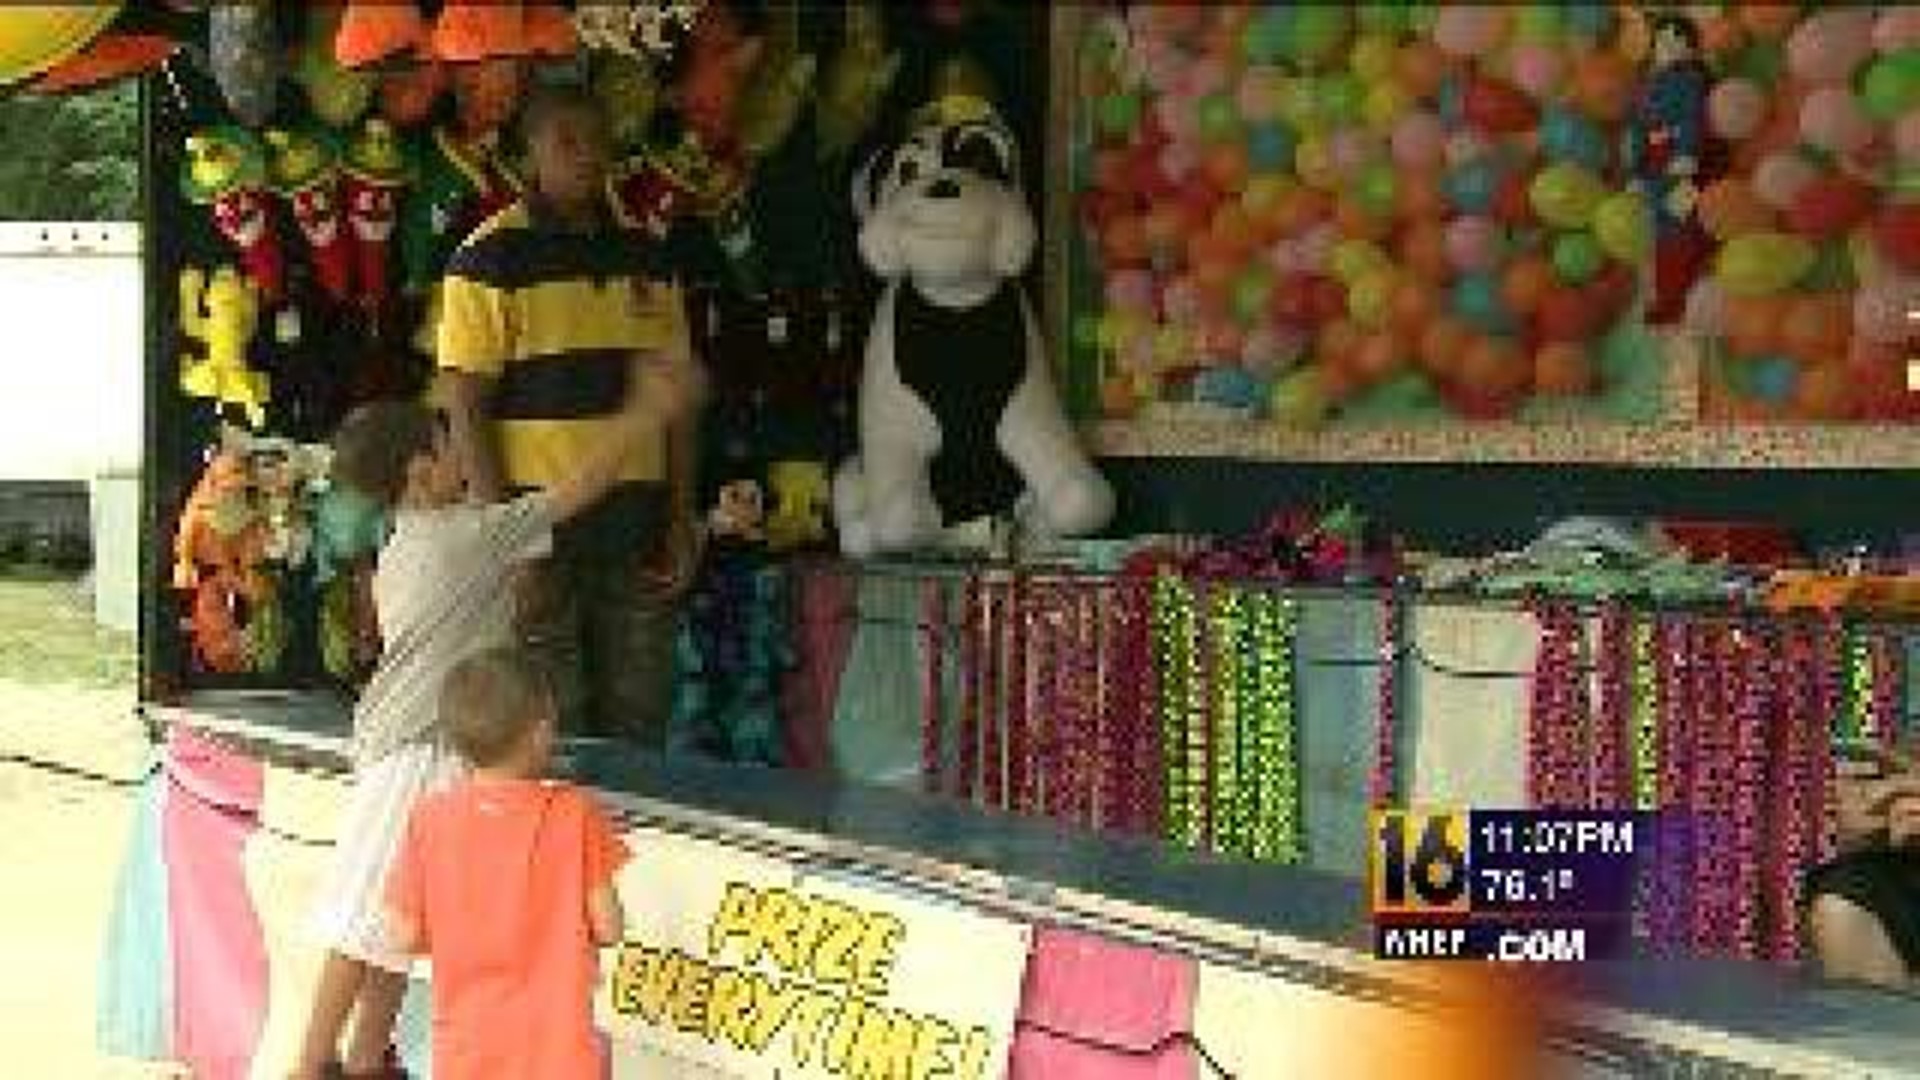 Community Comes Together at Fire Company Carnival